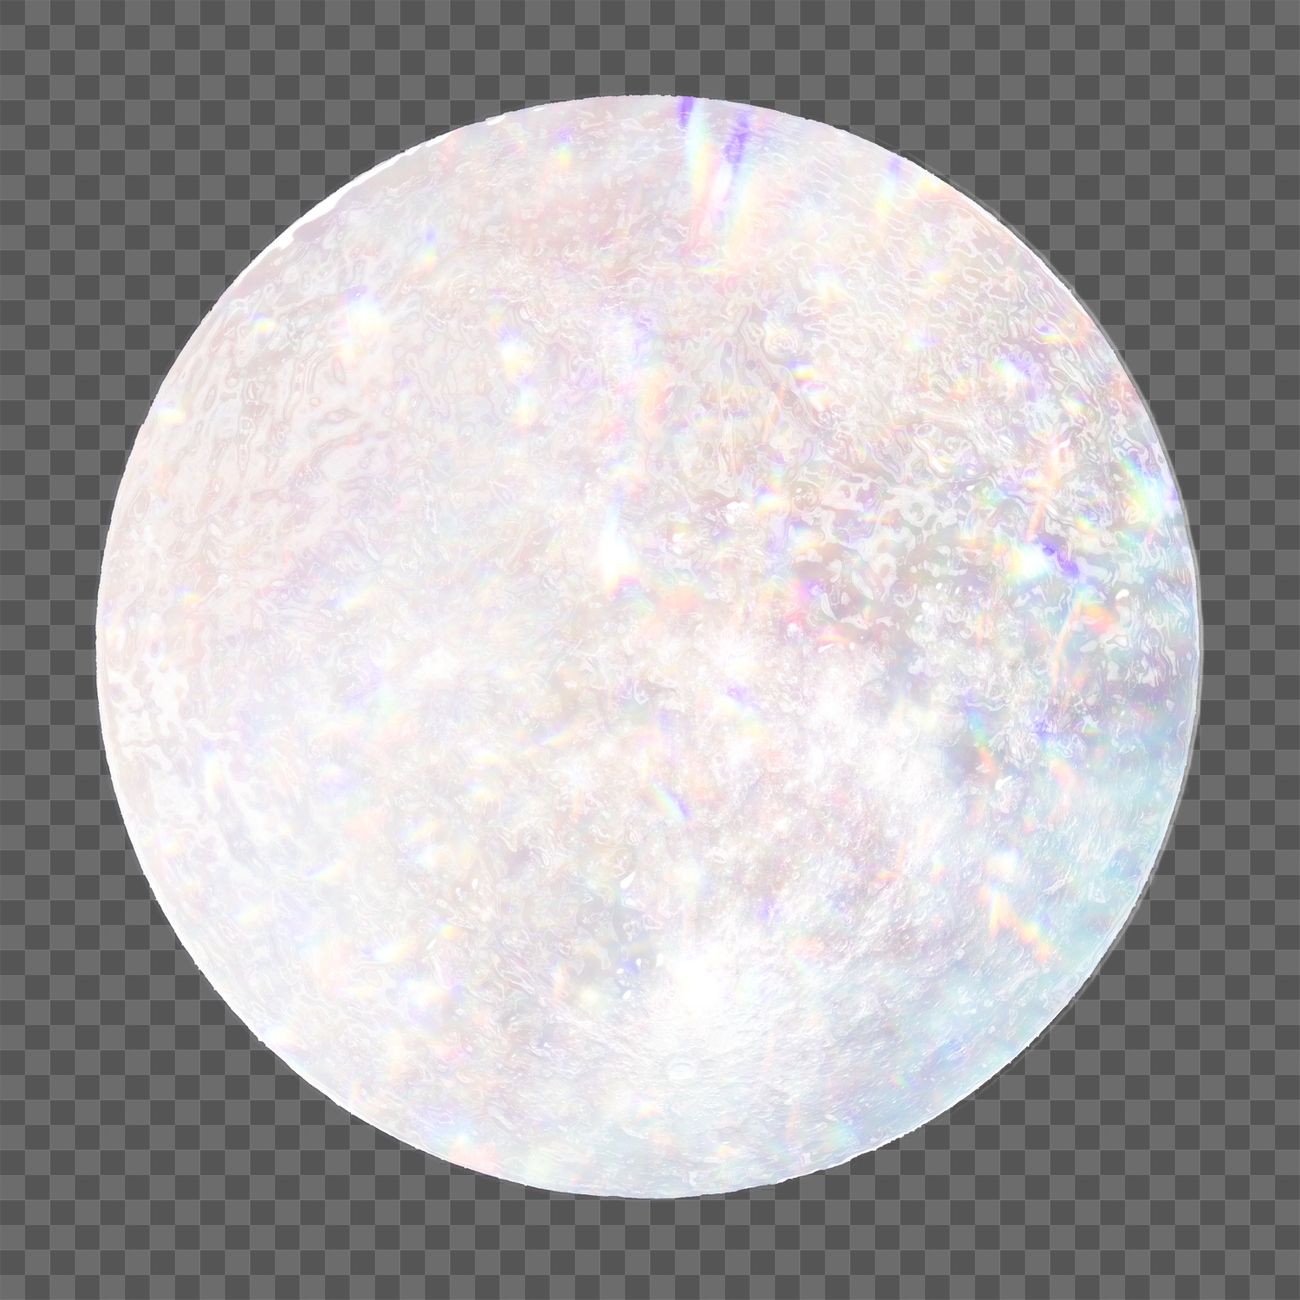 Silver holographic full moon design | Premium PNG Sticker - rawpixel